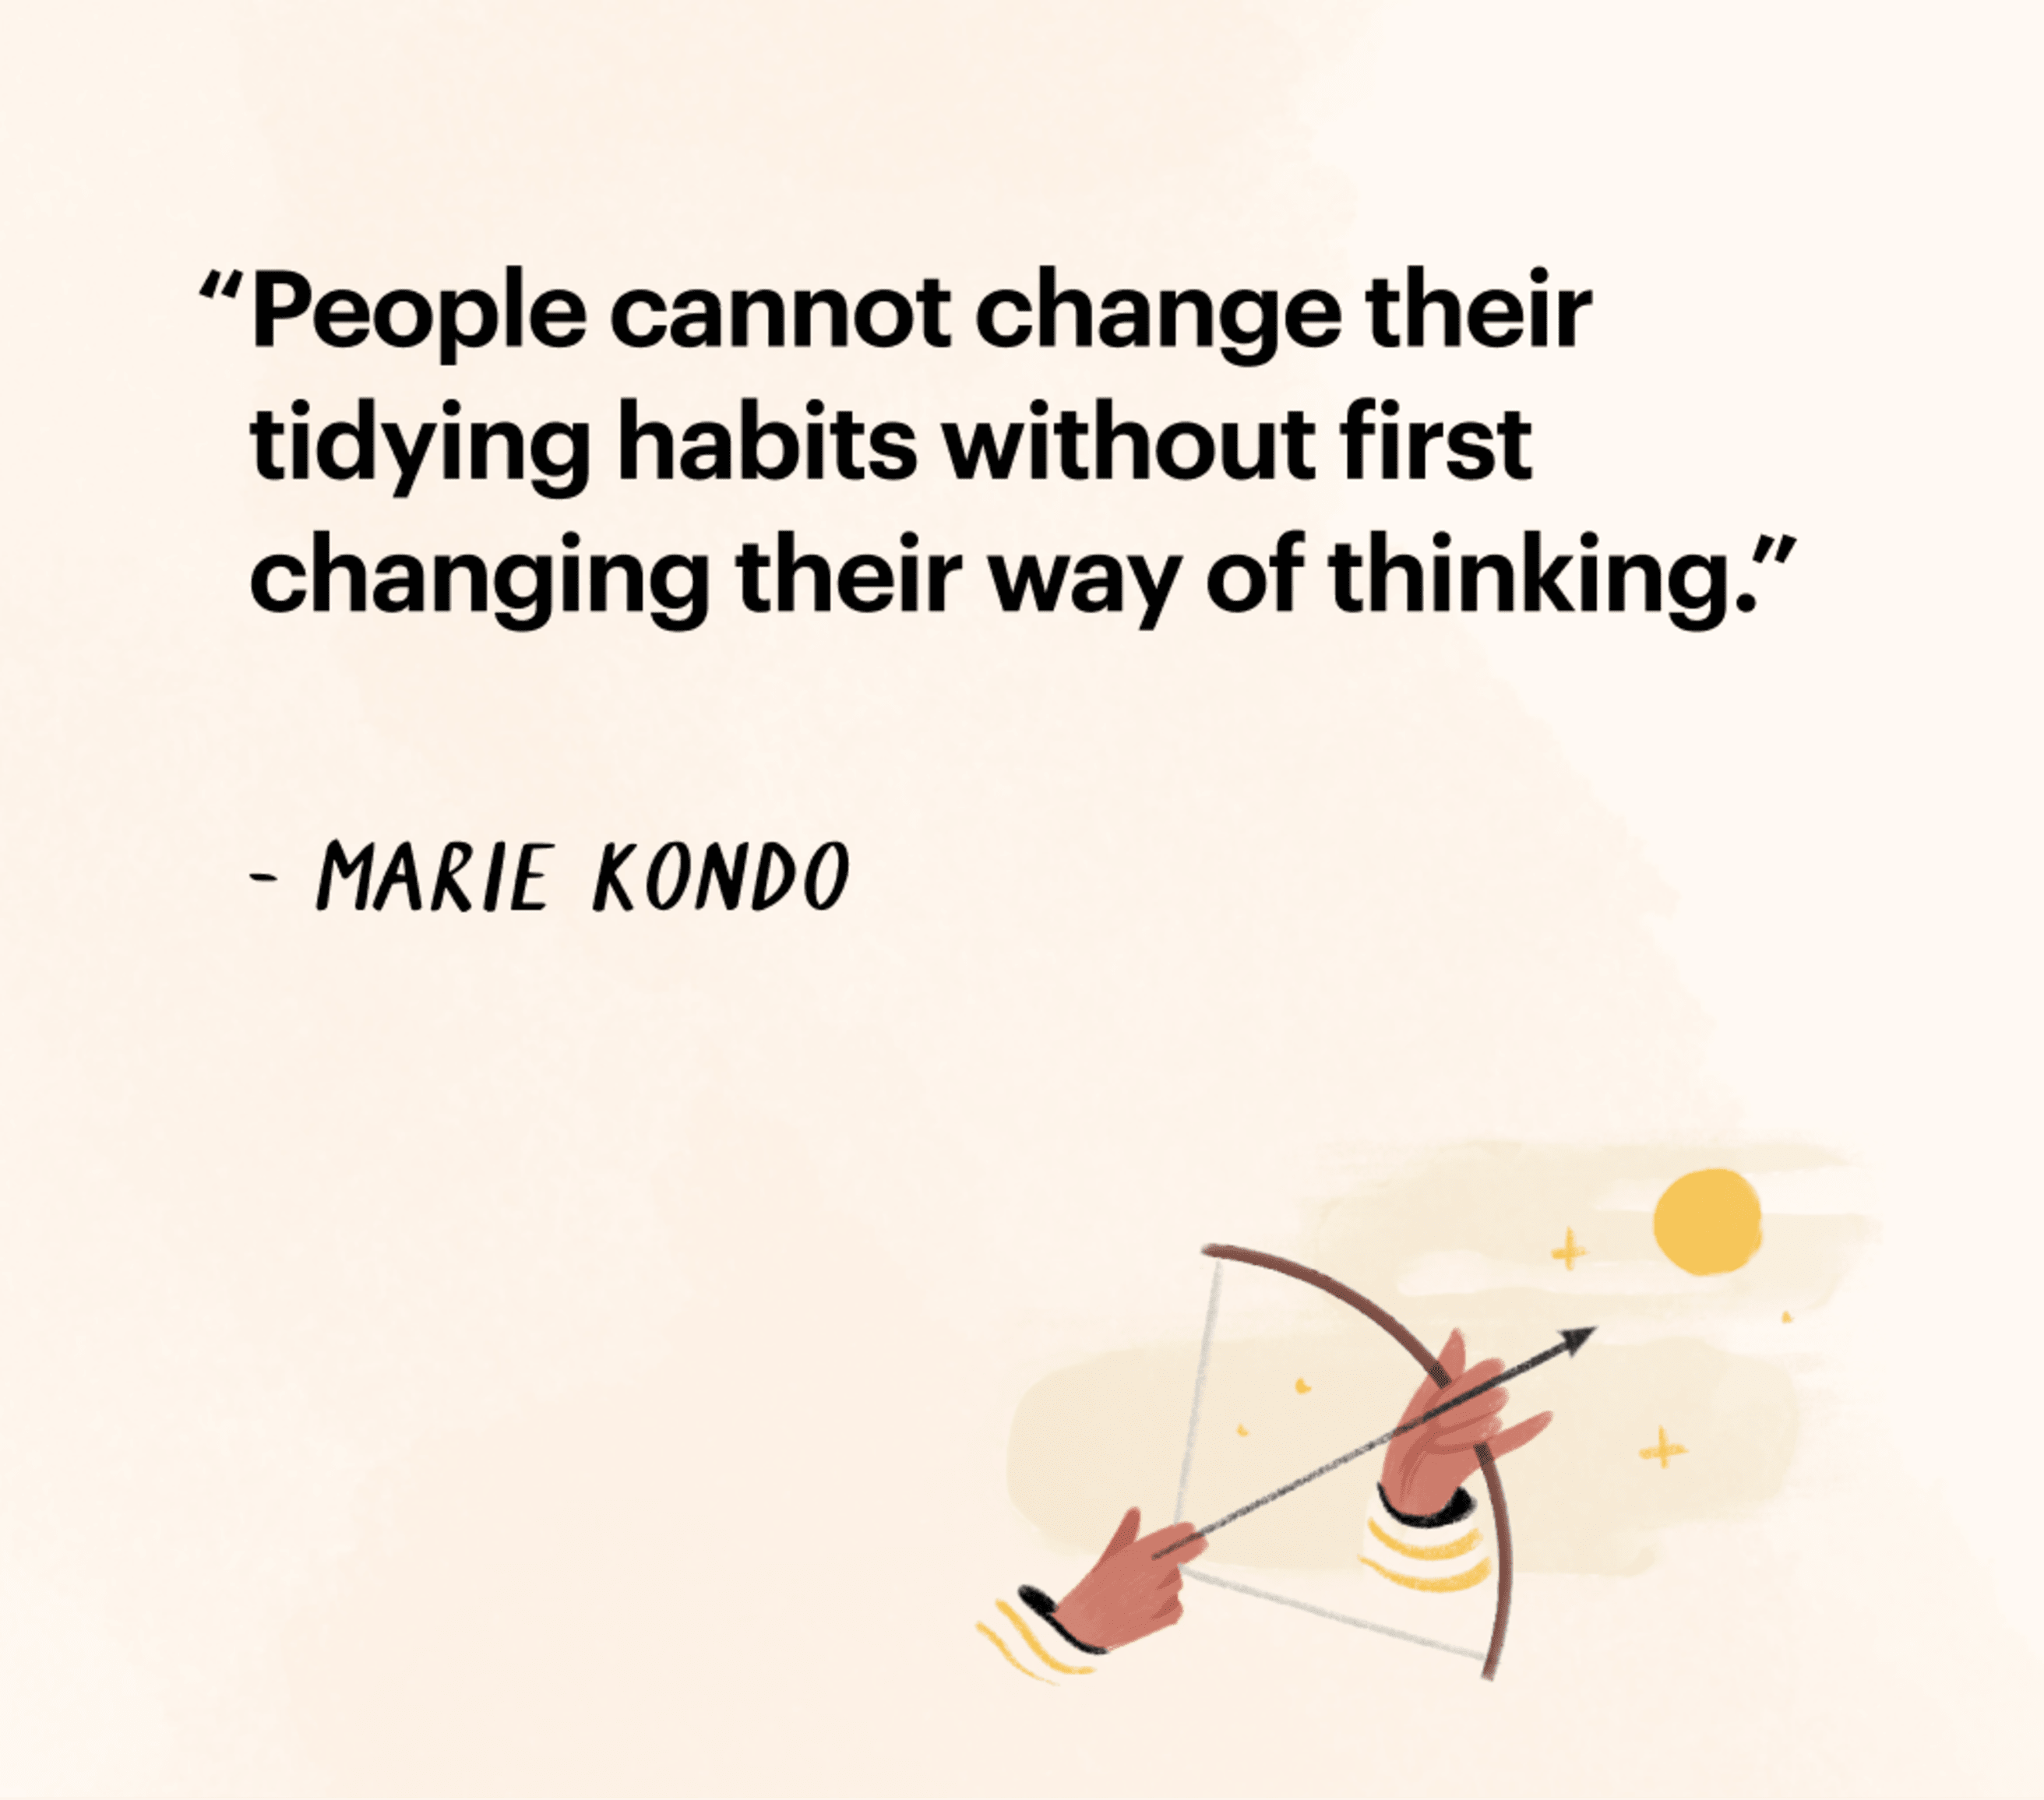 Quote by Marie Kondo &quot;People cannot change their tidying habits without first changing their way of thinking.&quot;